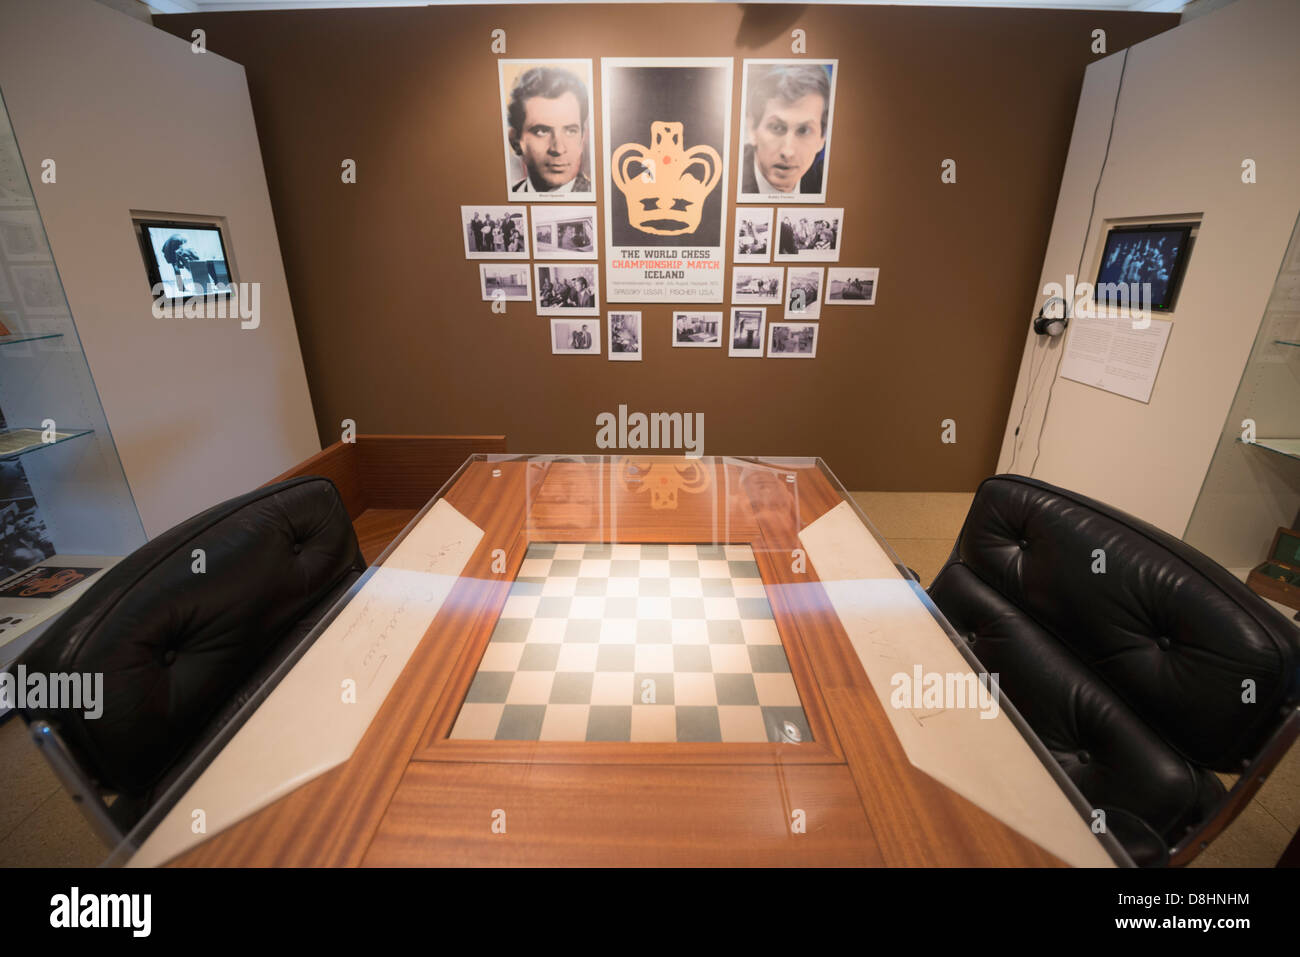 Bobby fischer boris spassky hi-res stock photography and images - Alamy